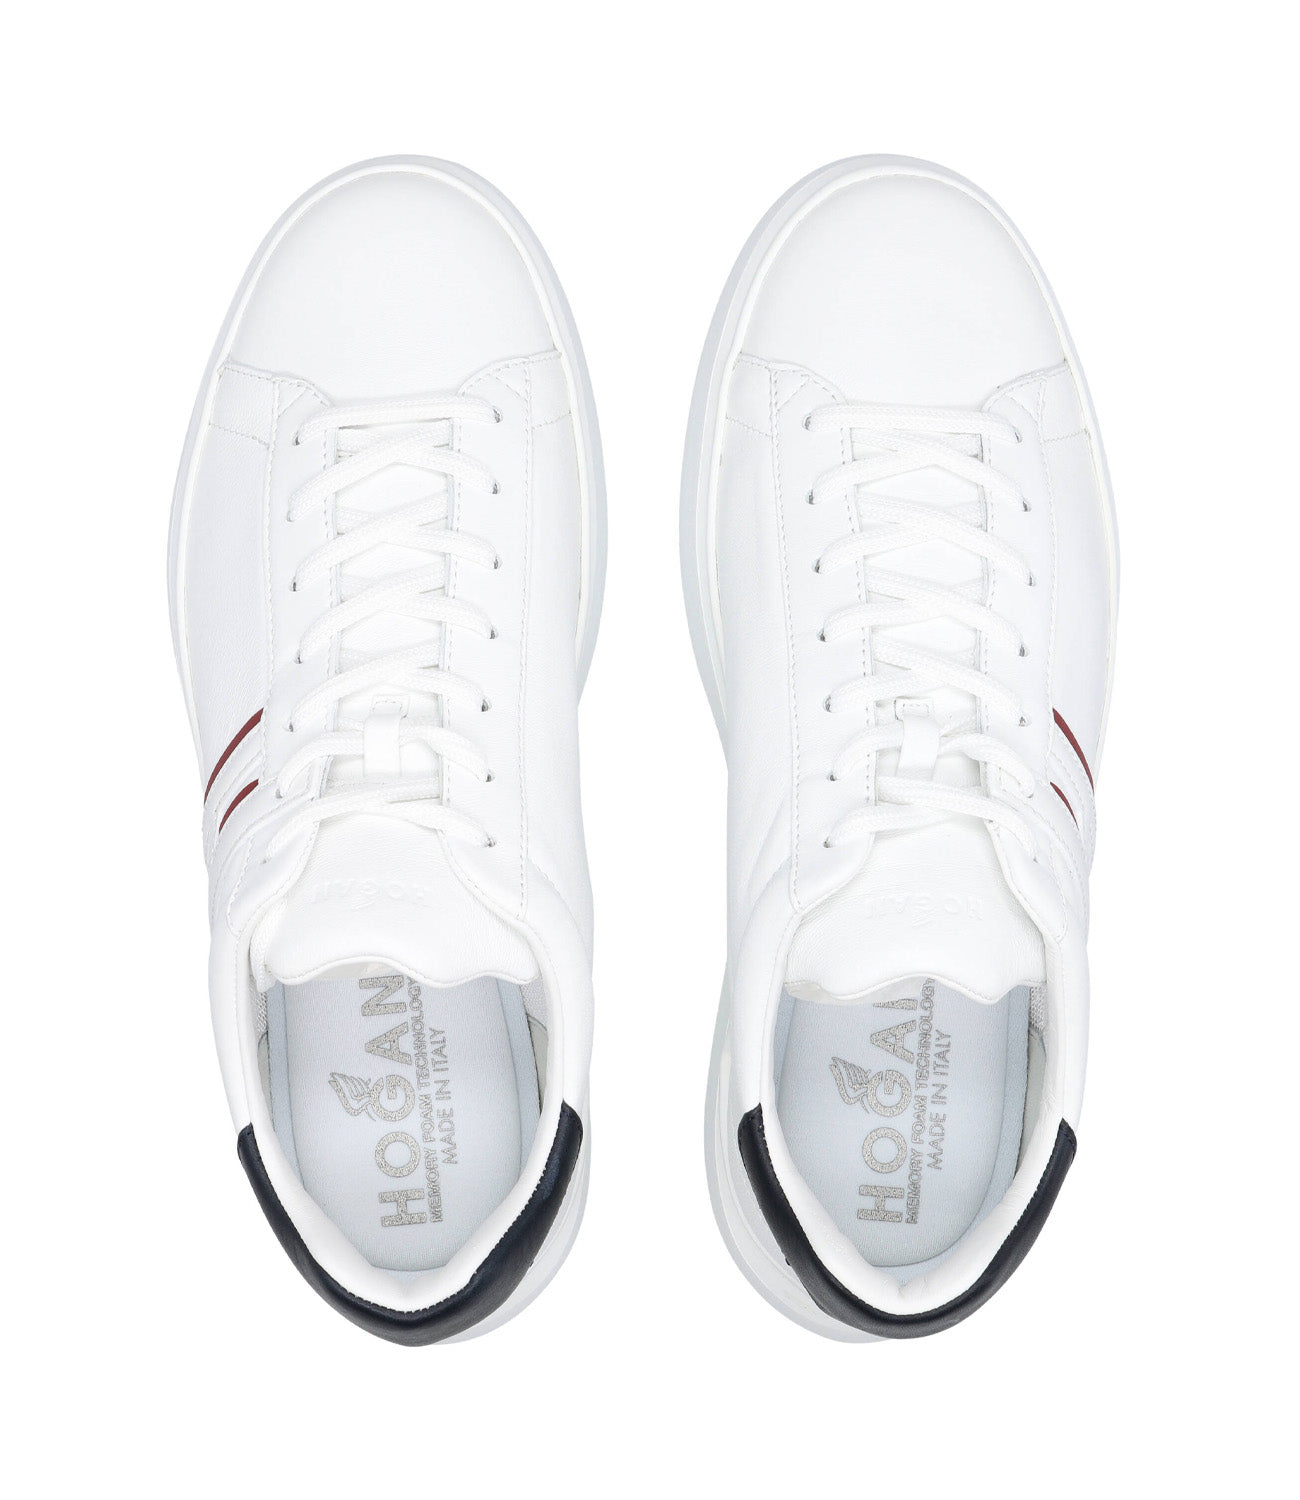 Hogan | Sneakers H580 White and Blue